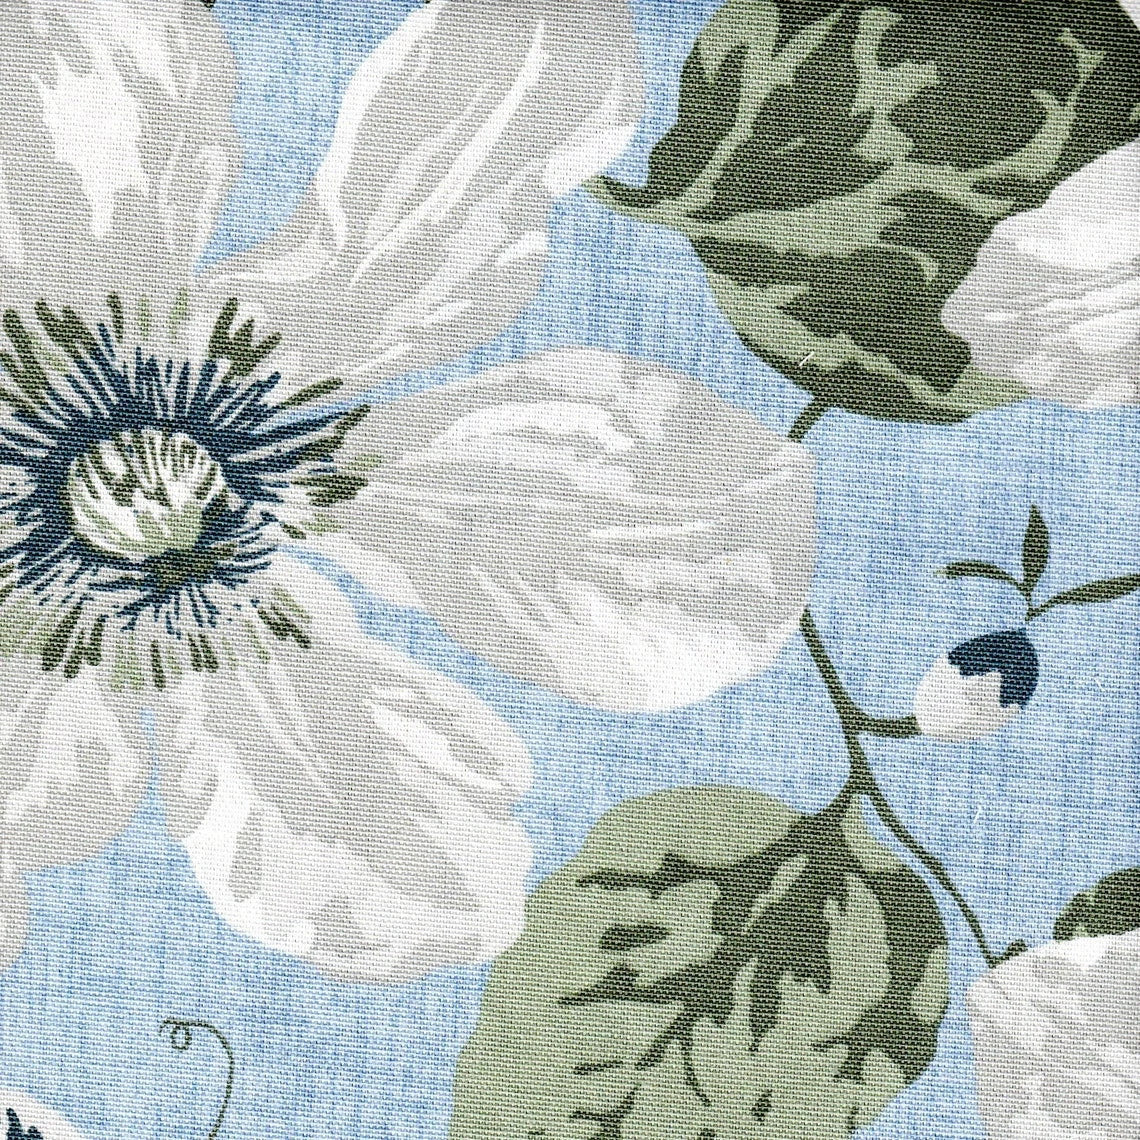 tie-up valance in nelly antique blue floral, large scale